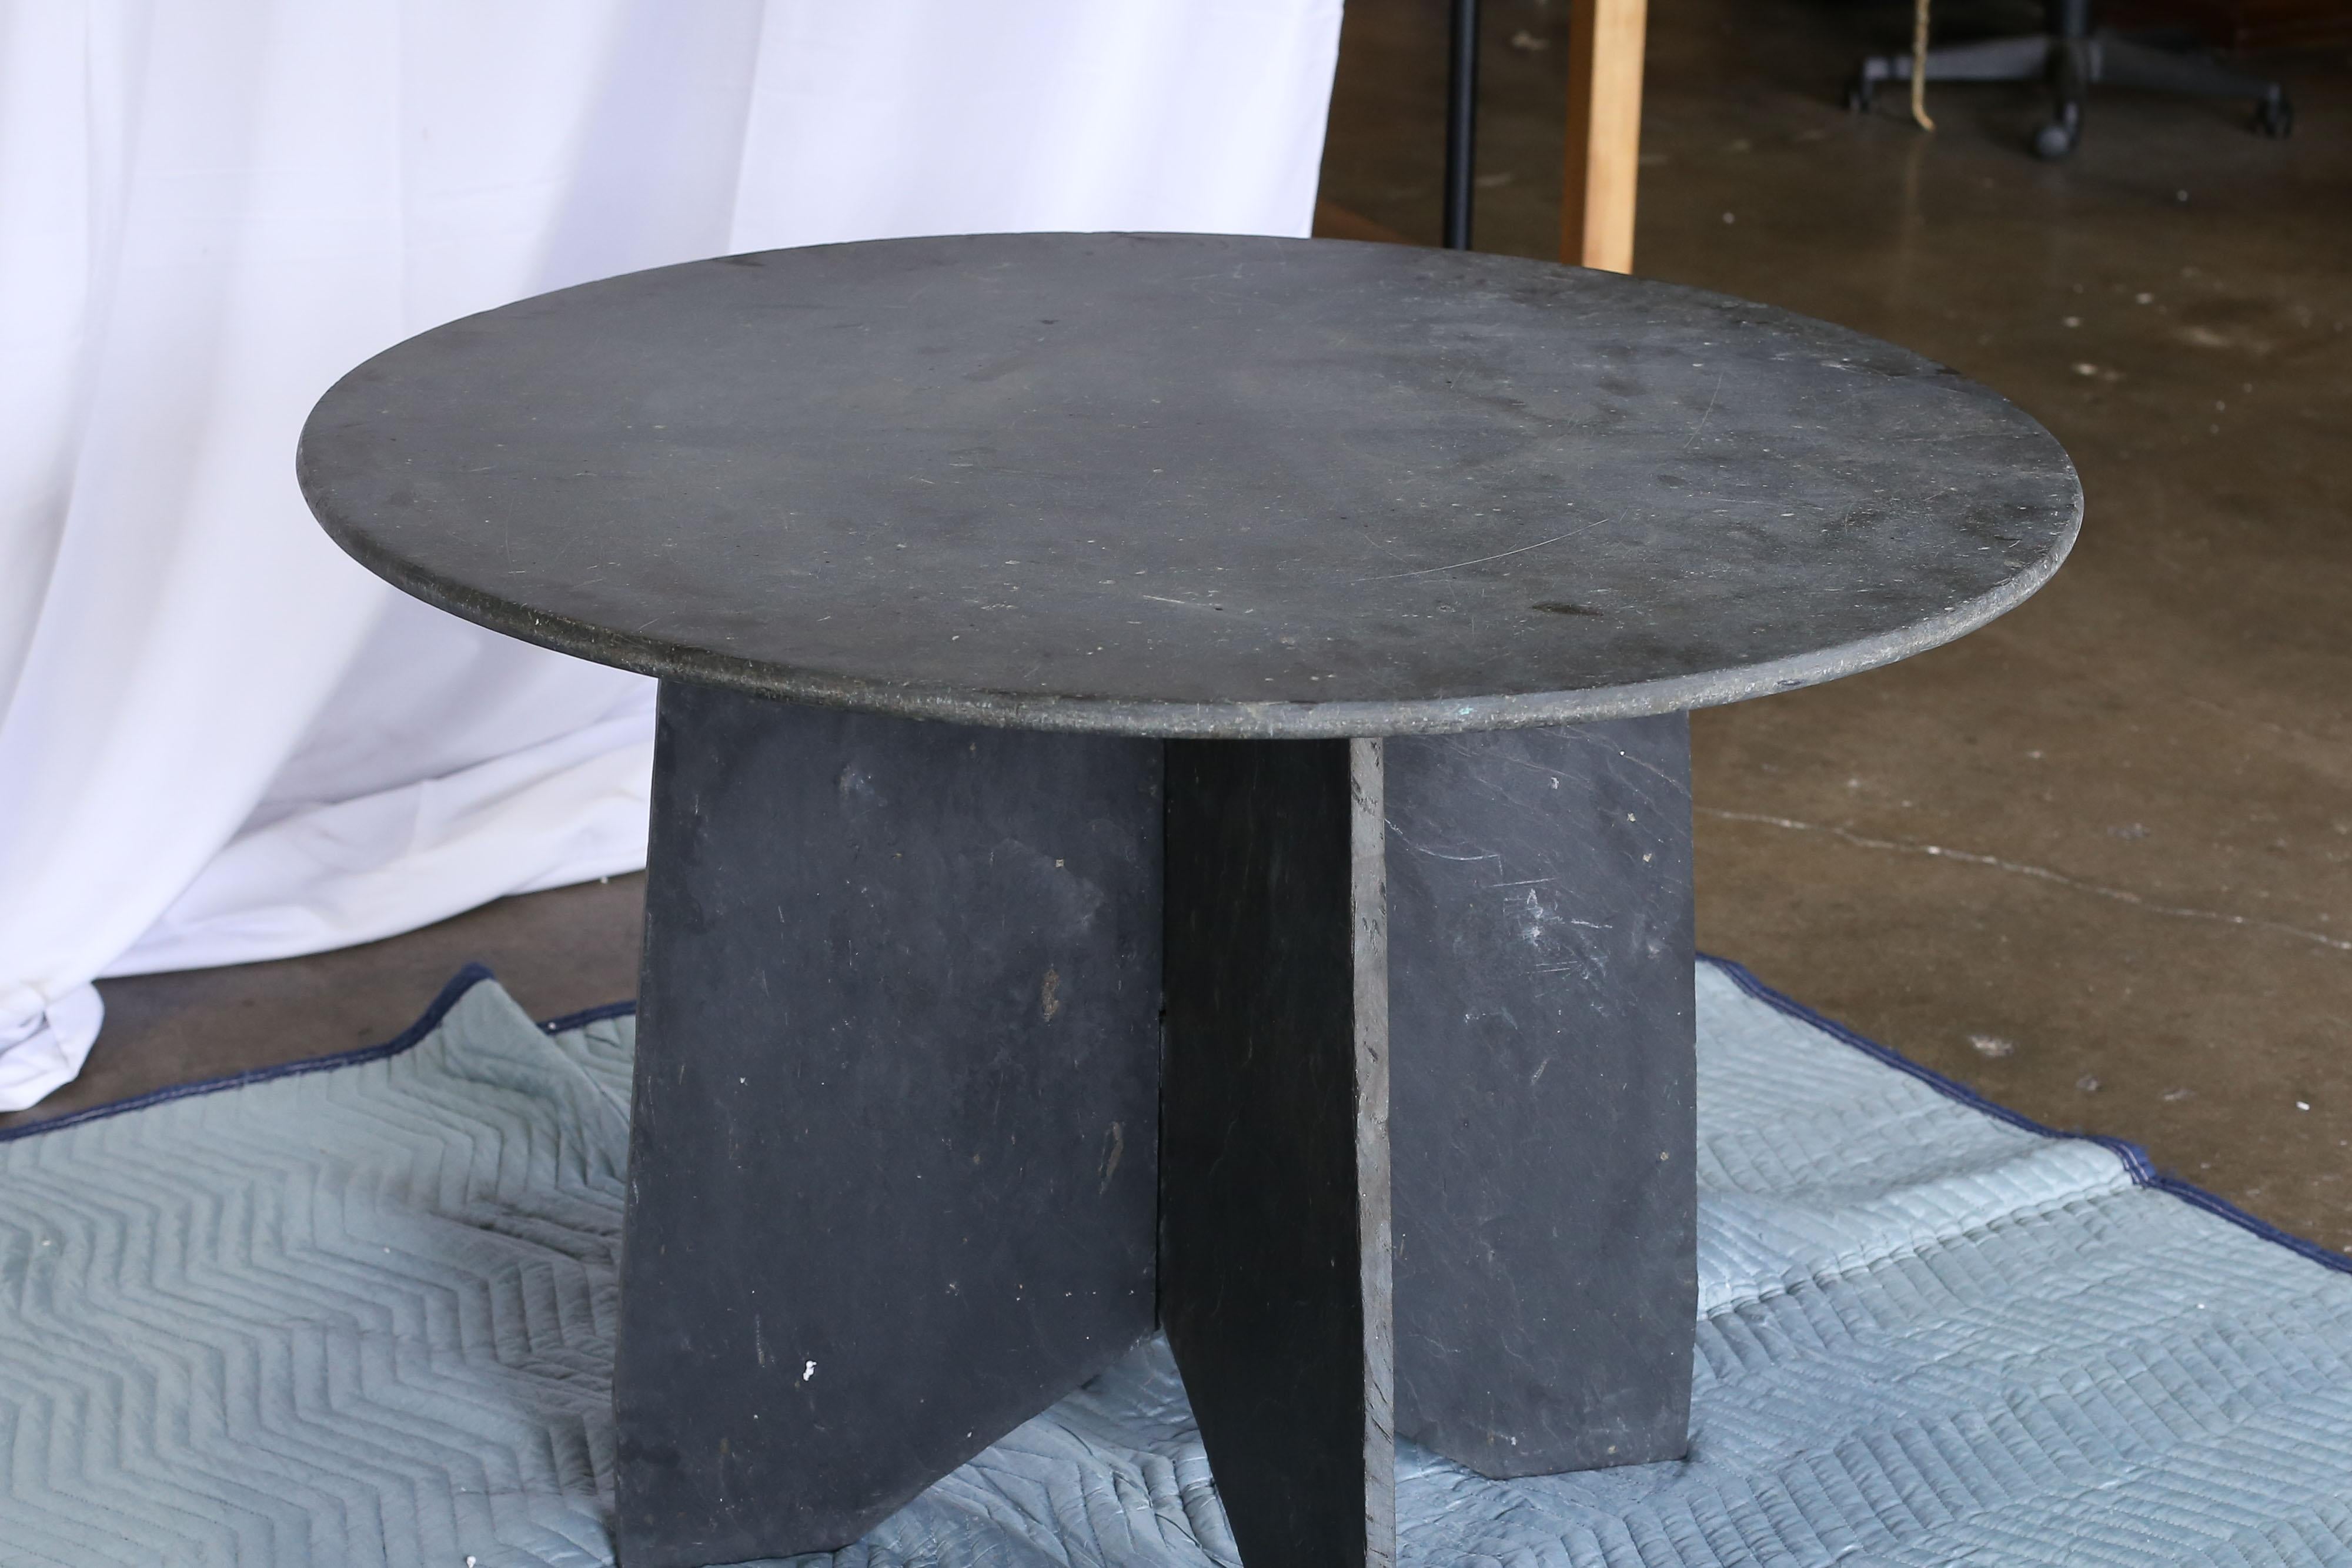 Round slate table from Ardoise, France. Bottom consists of two interlocking pieces with a single round top. All natural stone.